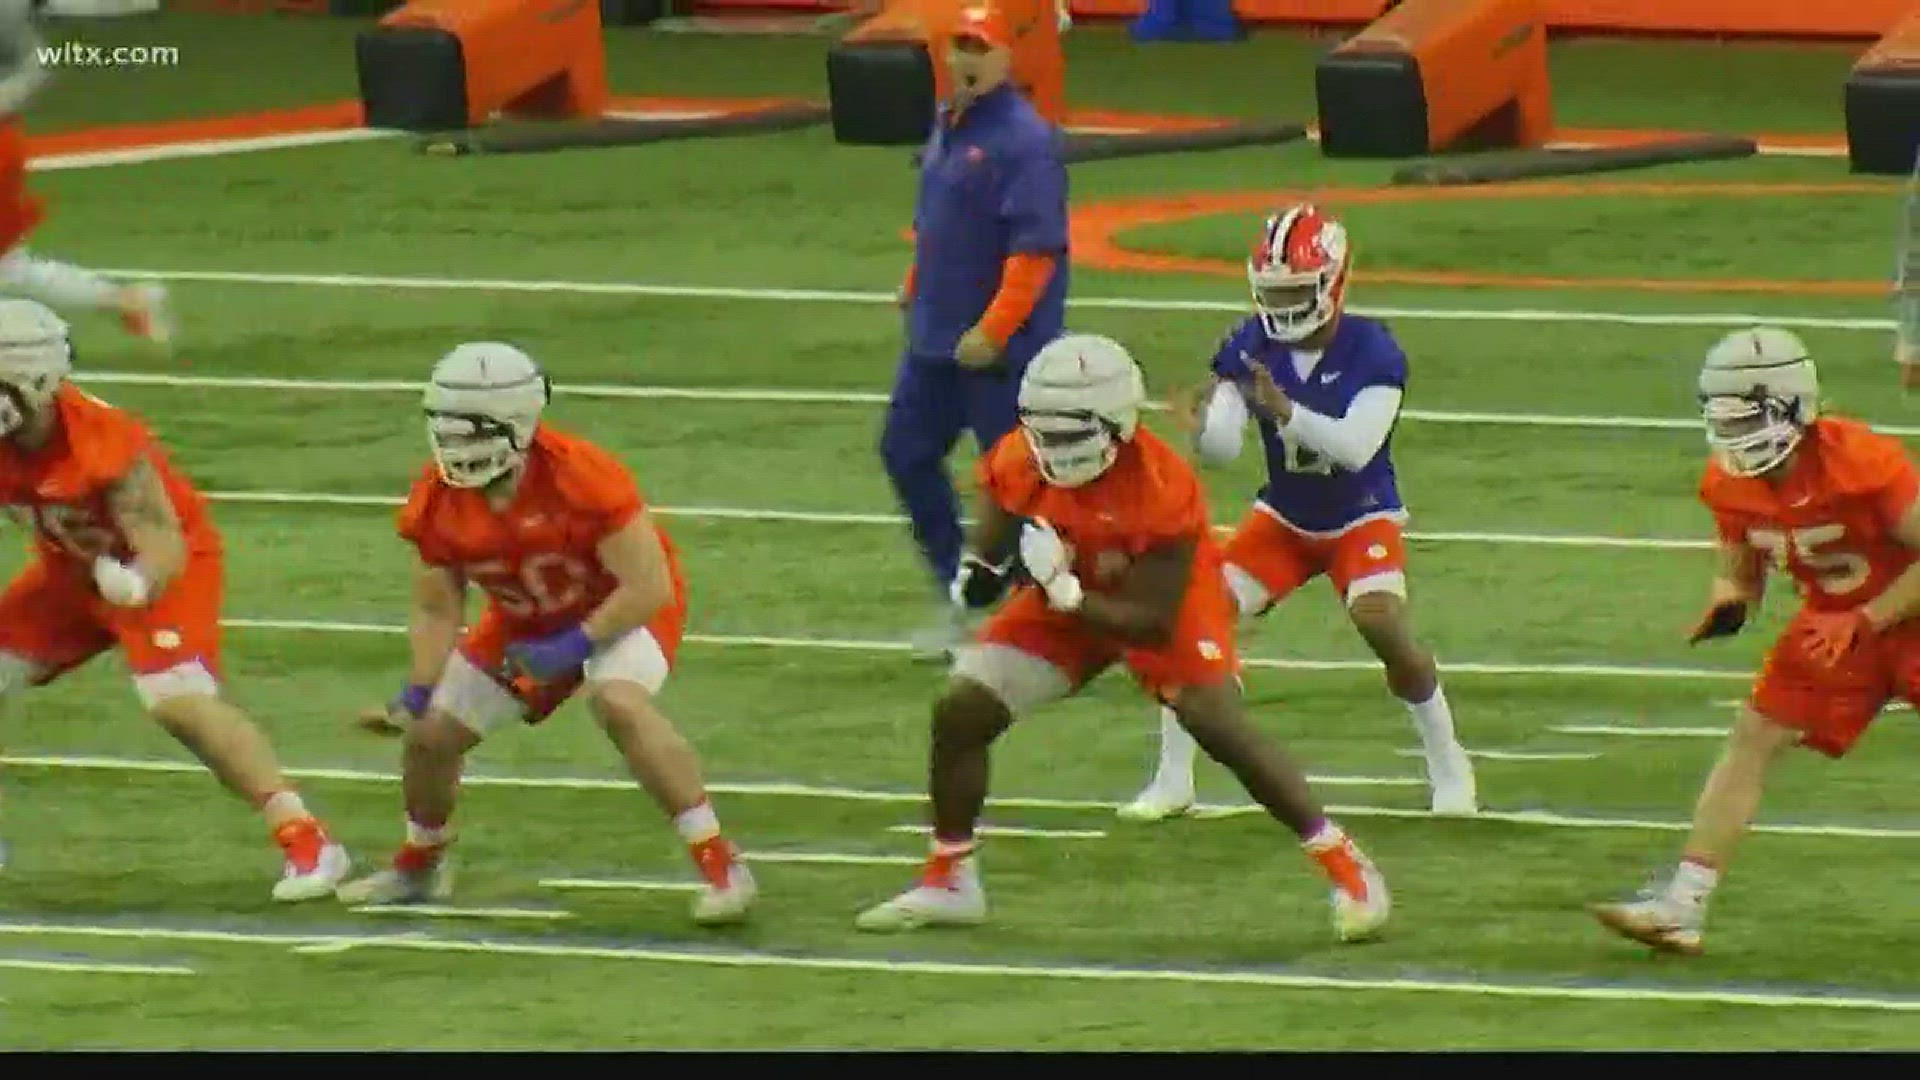 Spring drills kicked off Wednesday for the Clemson Tigers.